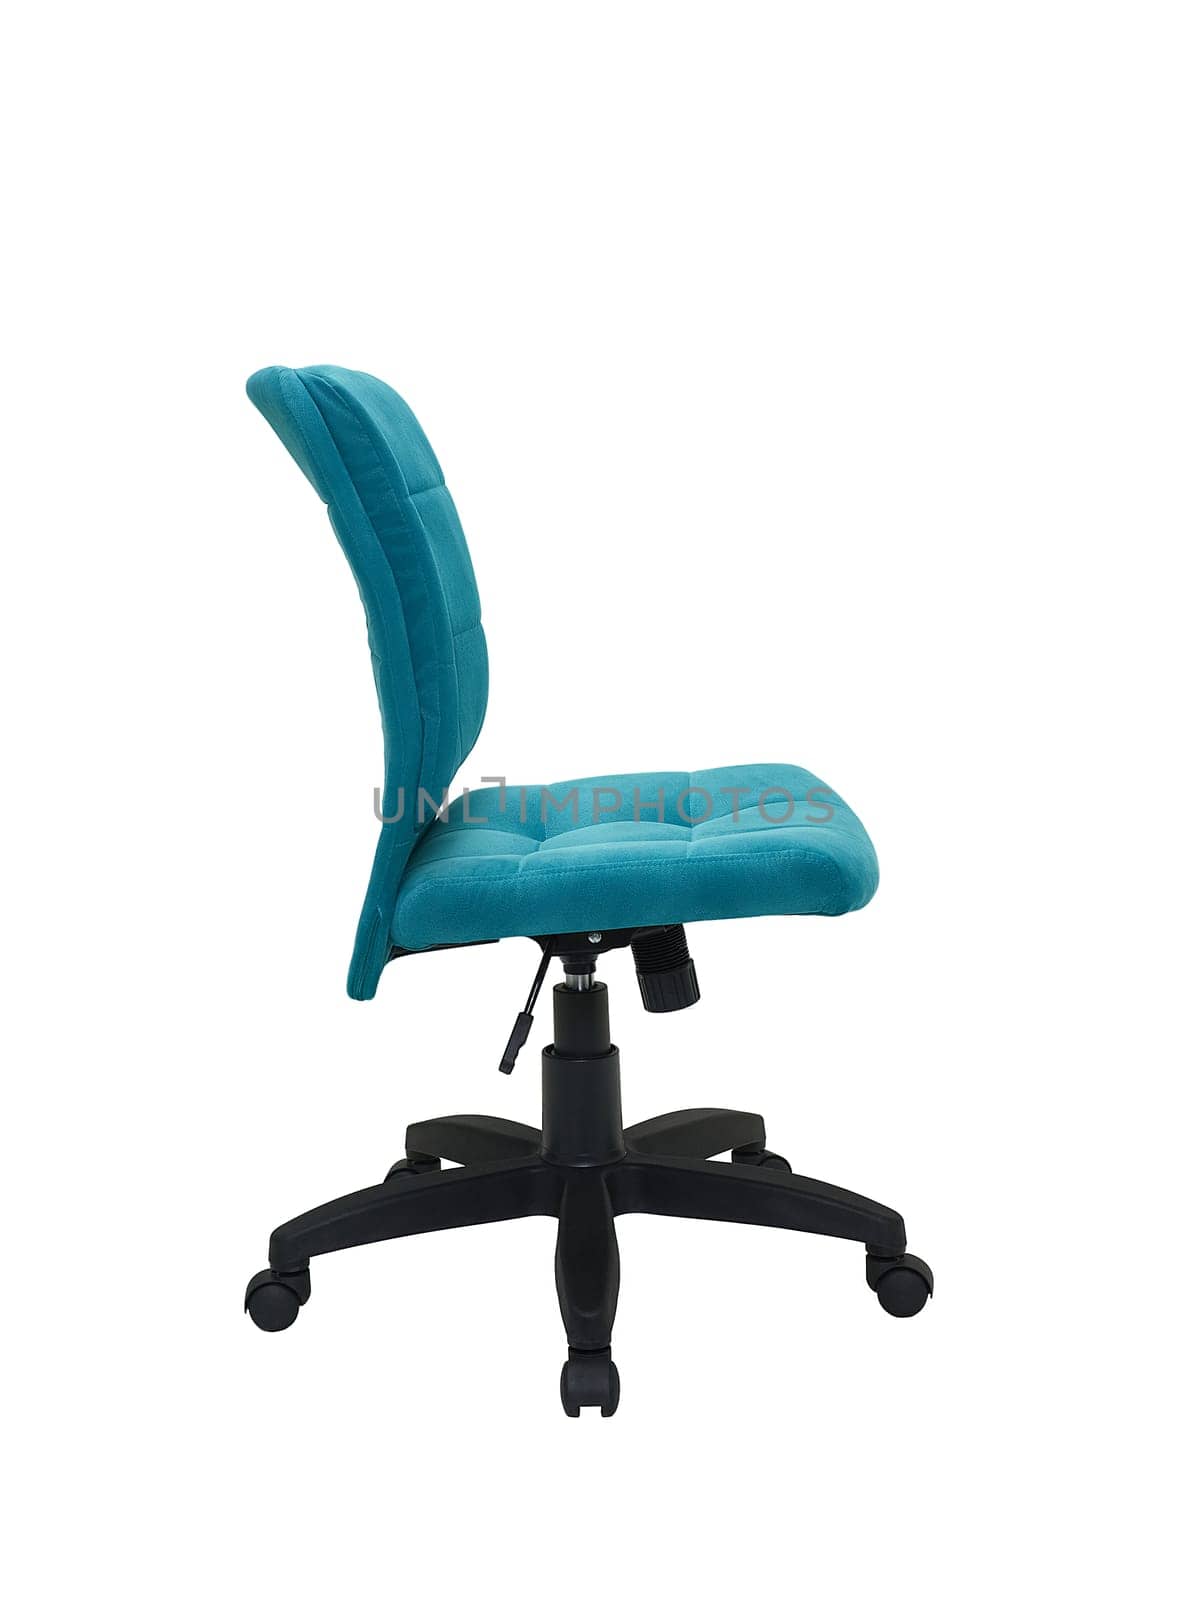 blue office fabric armchair on wheels isolated on white background, side view. modern furniture, interior, home design